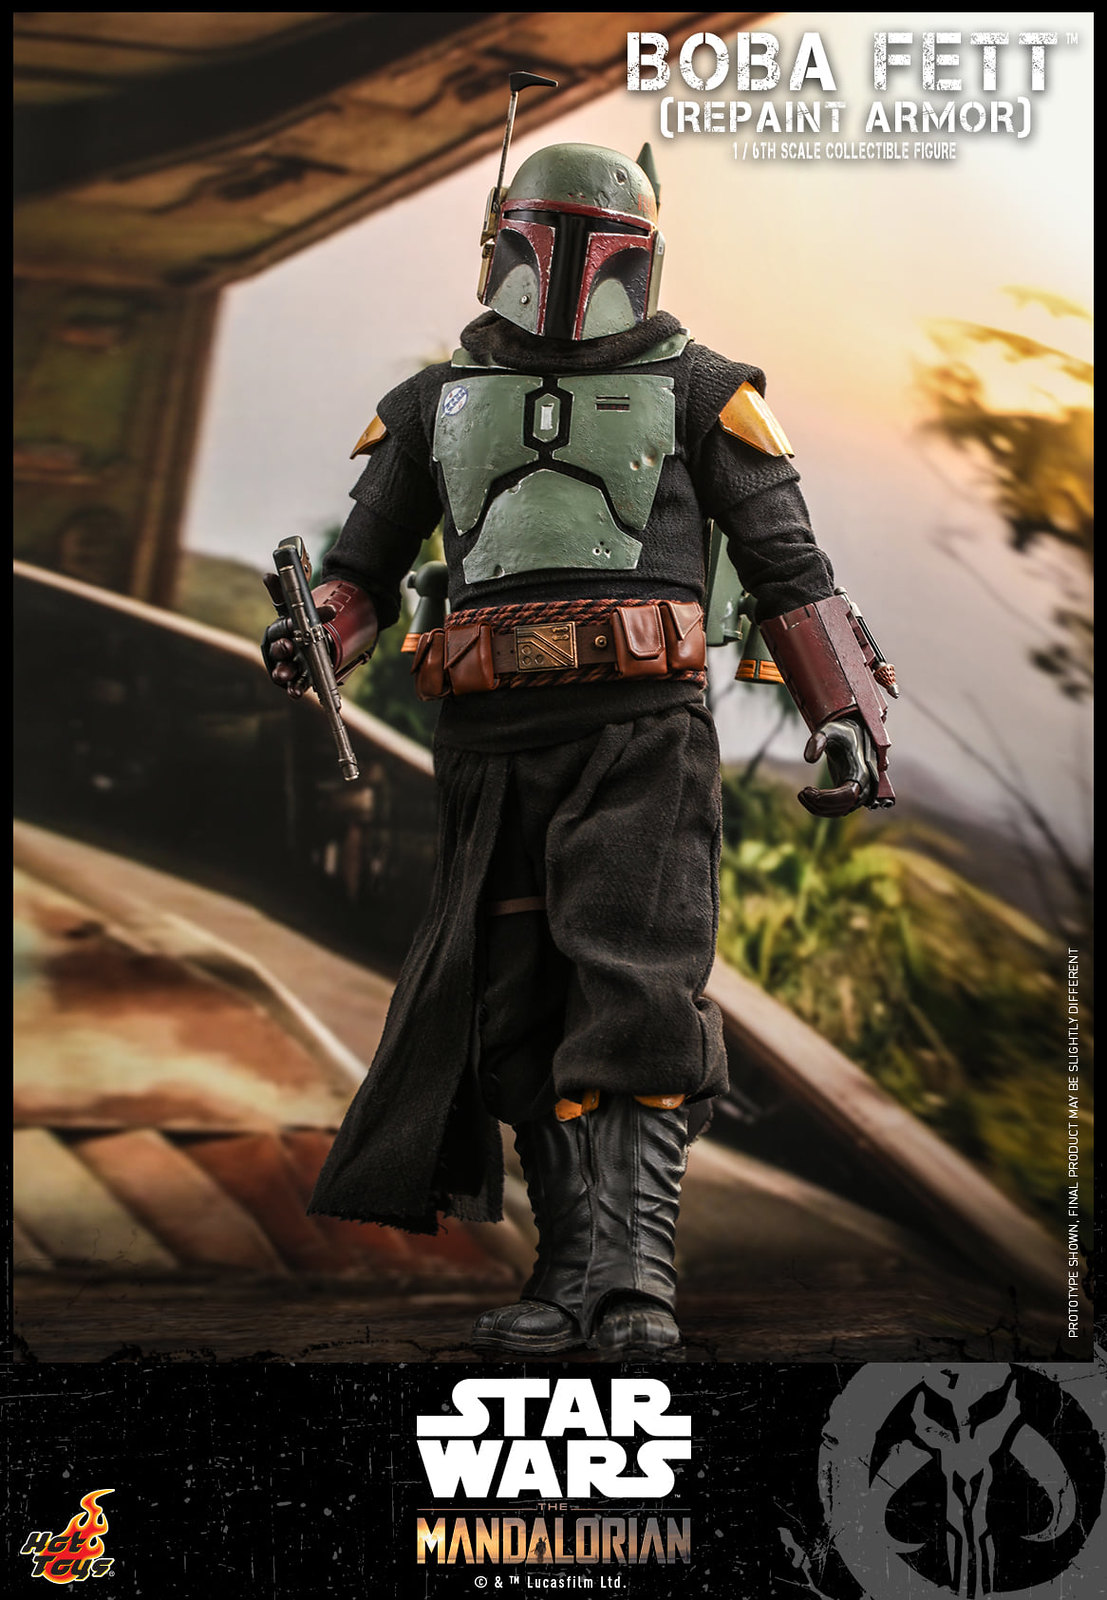 Star Wars: The Mandalorian™ - 1/6th scale Boba Fett™ (Repaint Armor) Collectible figure/ figure and Throne Collectible Set 51310543162_644ccae3ec_h